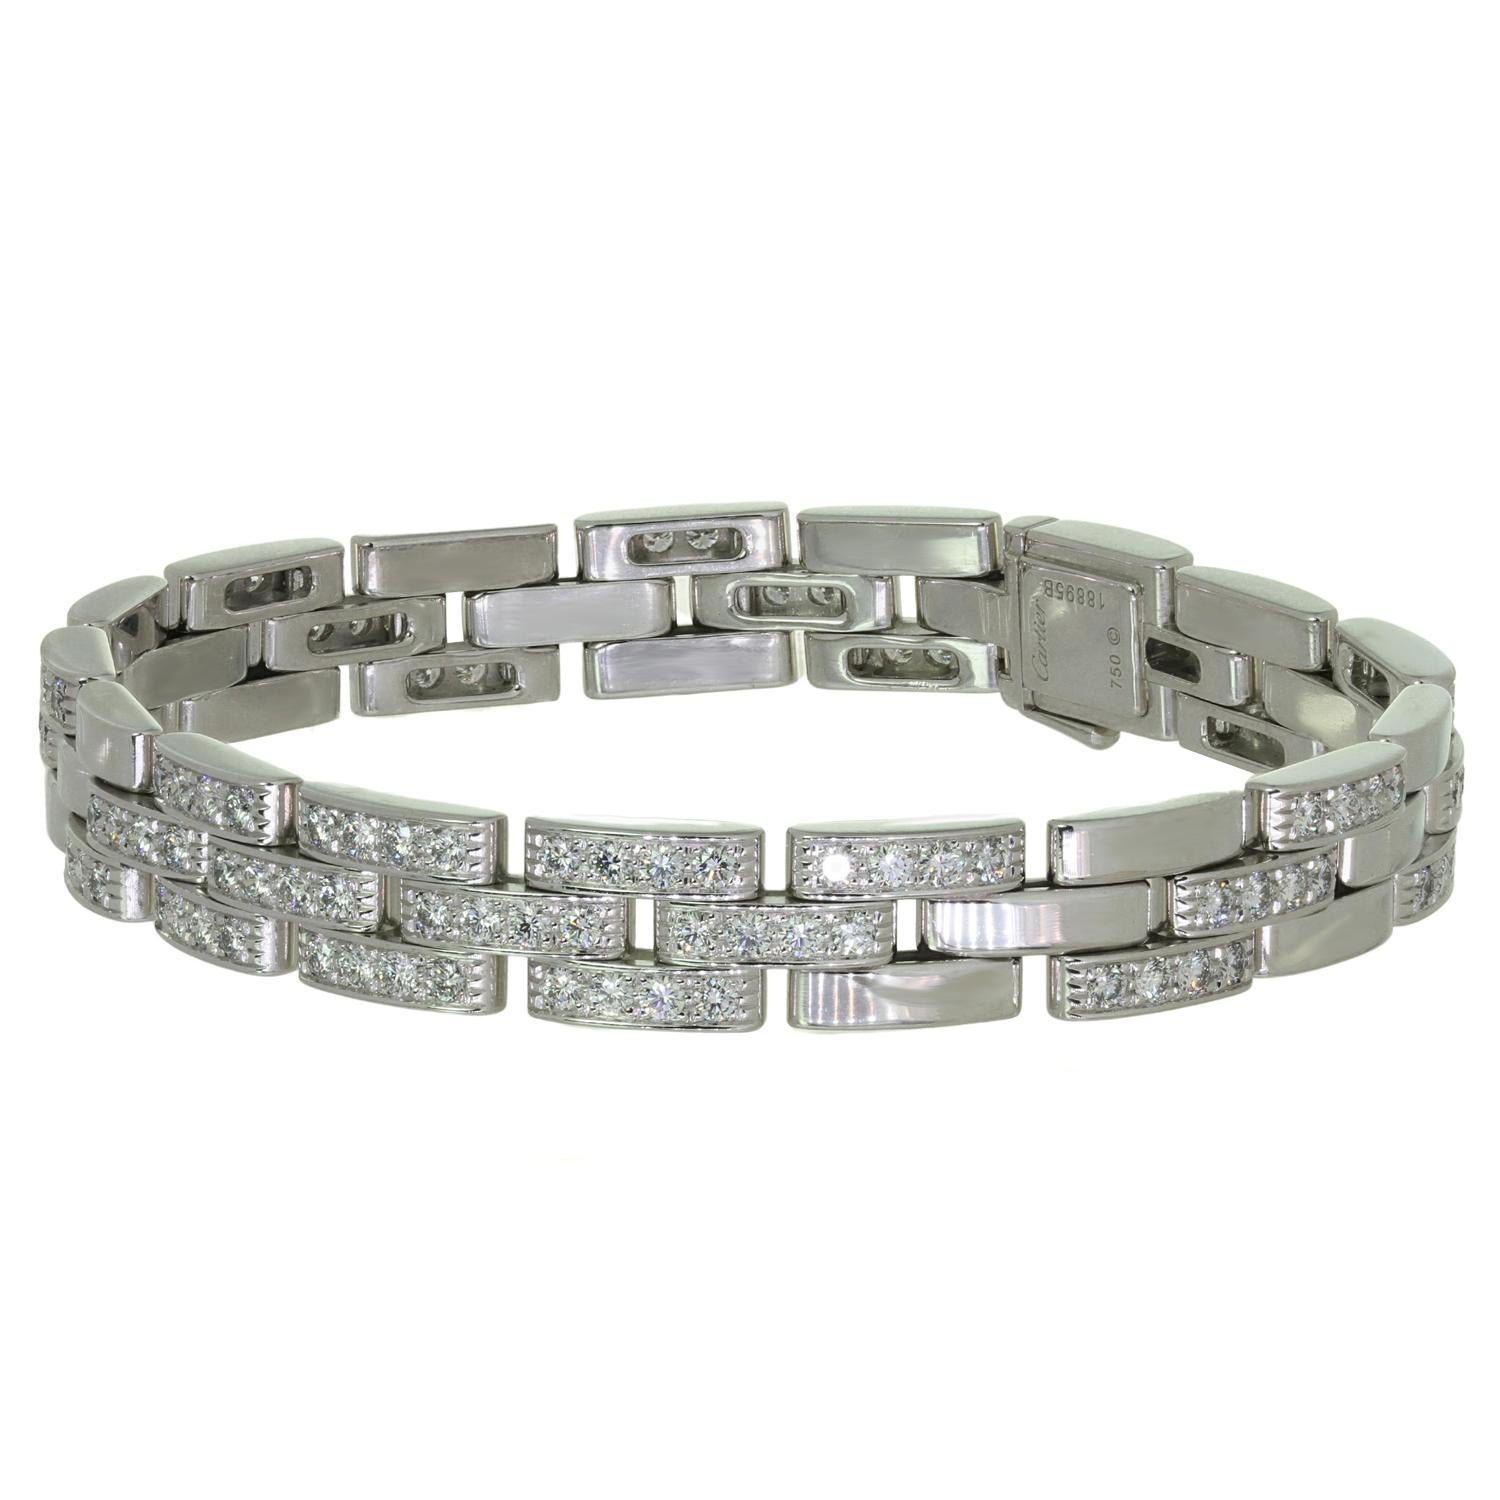 CARTIER Maillon Panthere Diamond White Gold Bracelet In Excellent Condition For Sale In New York, NY